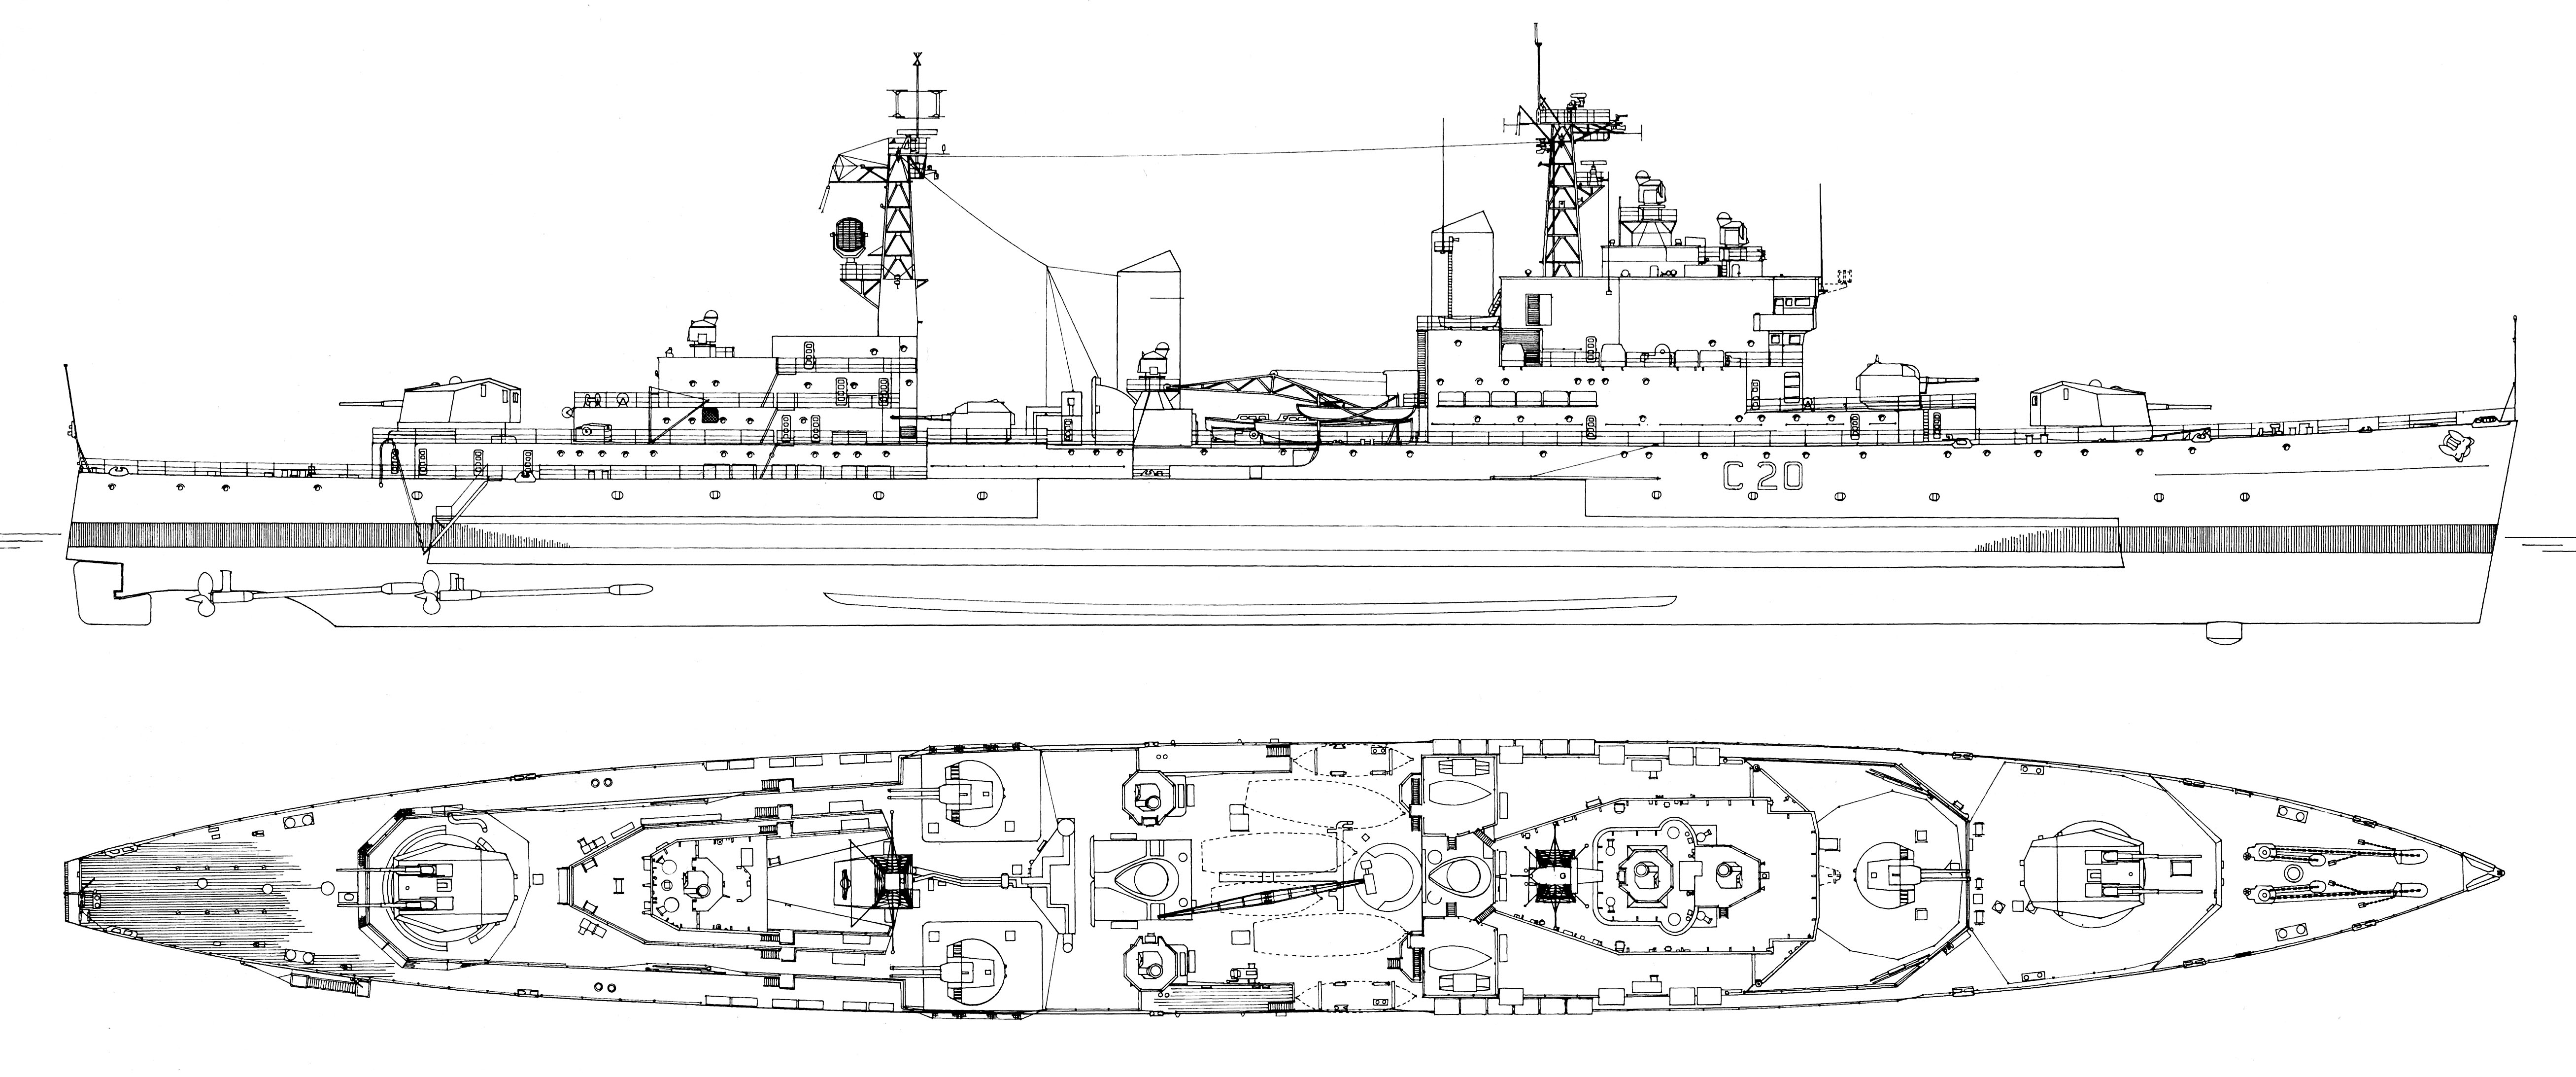 zz Tiger in 03-1959 as completed [A.D.Baker III].jpg